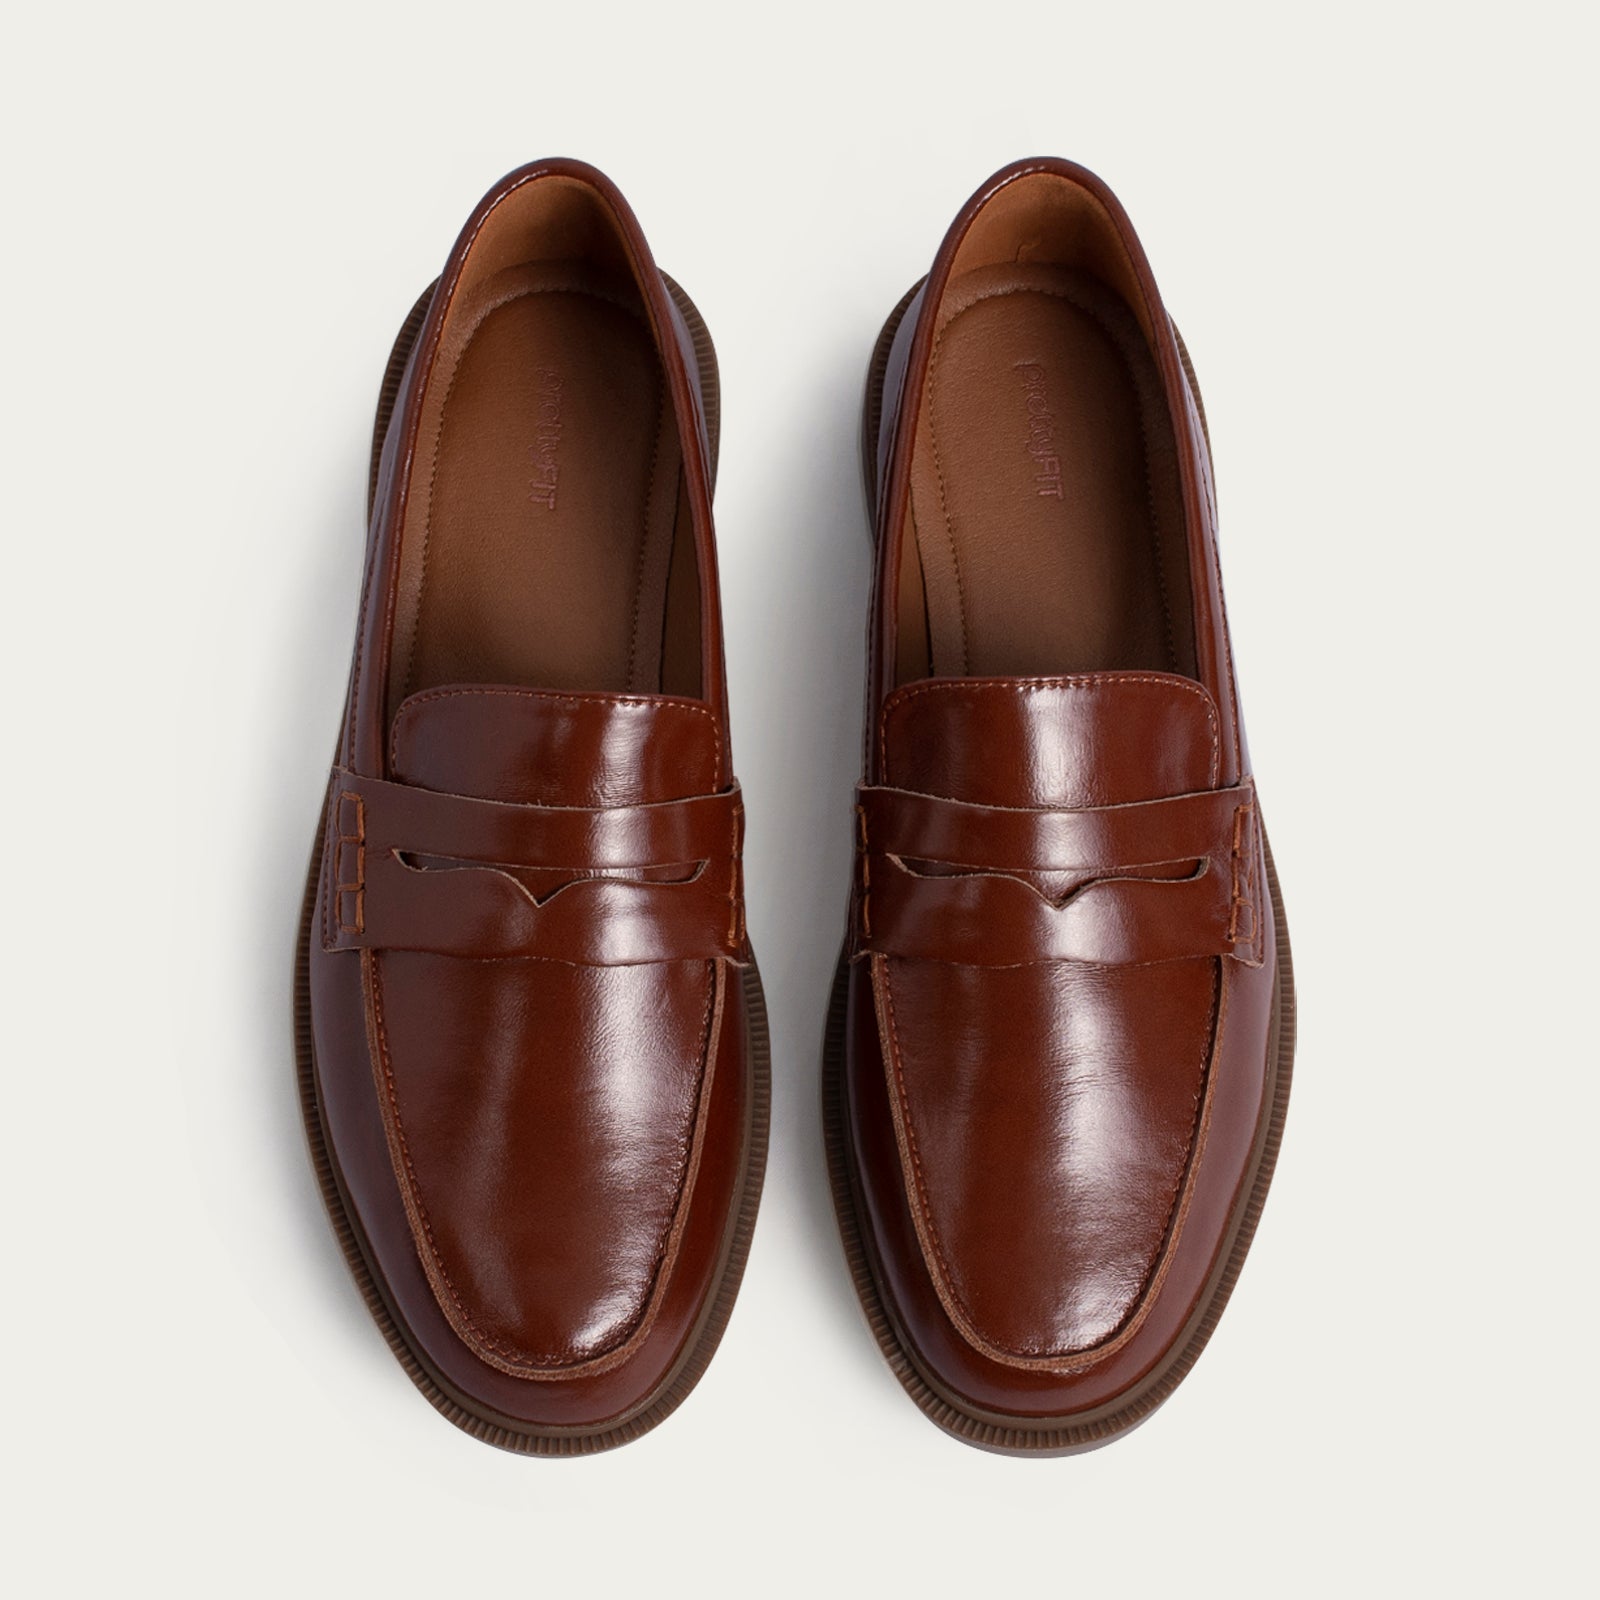 Mireen Loafers